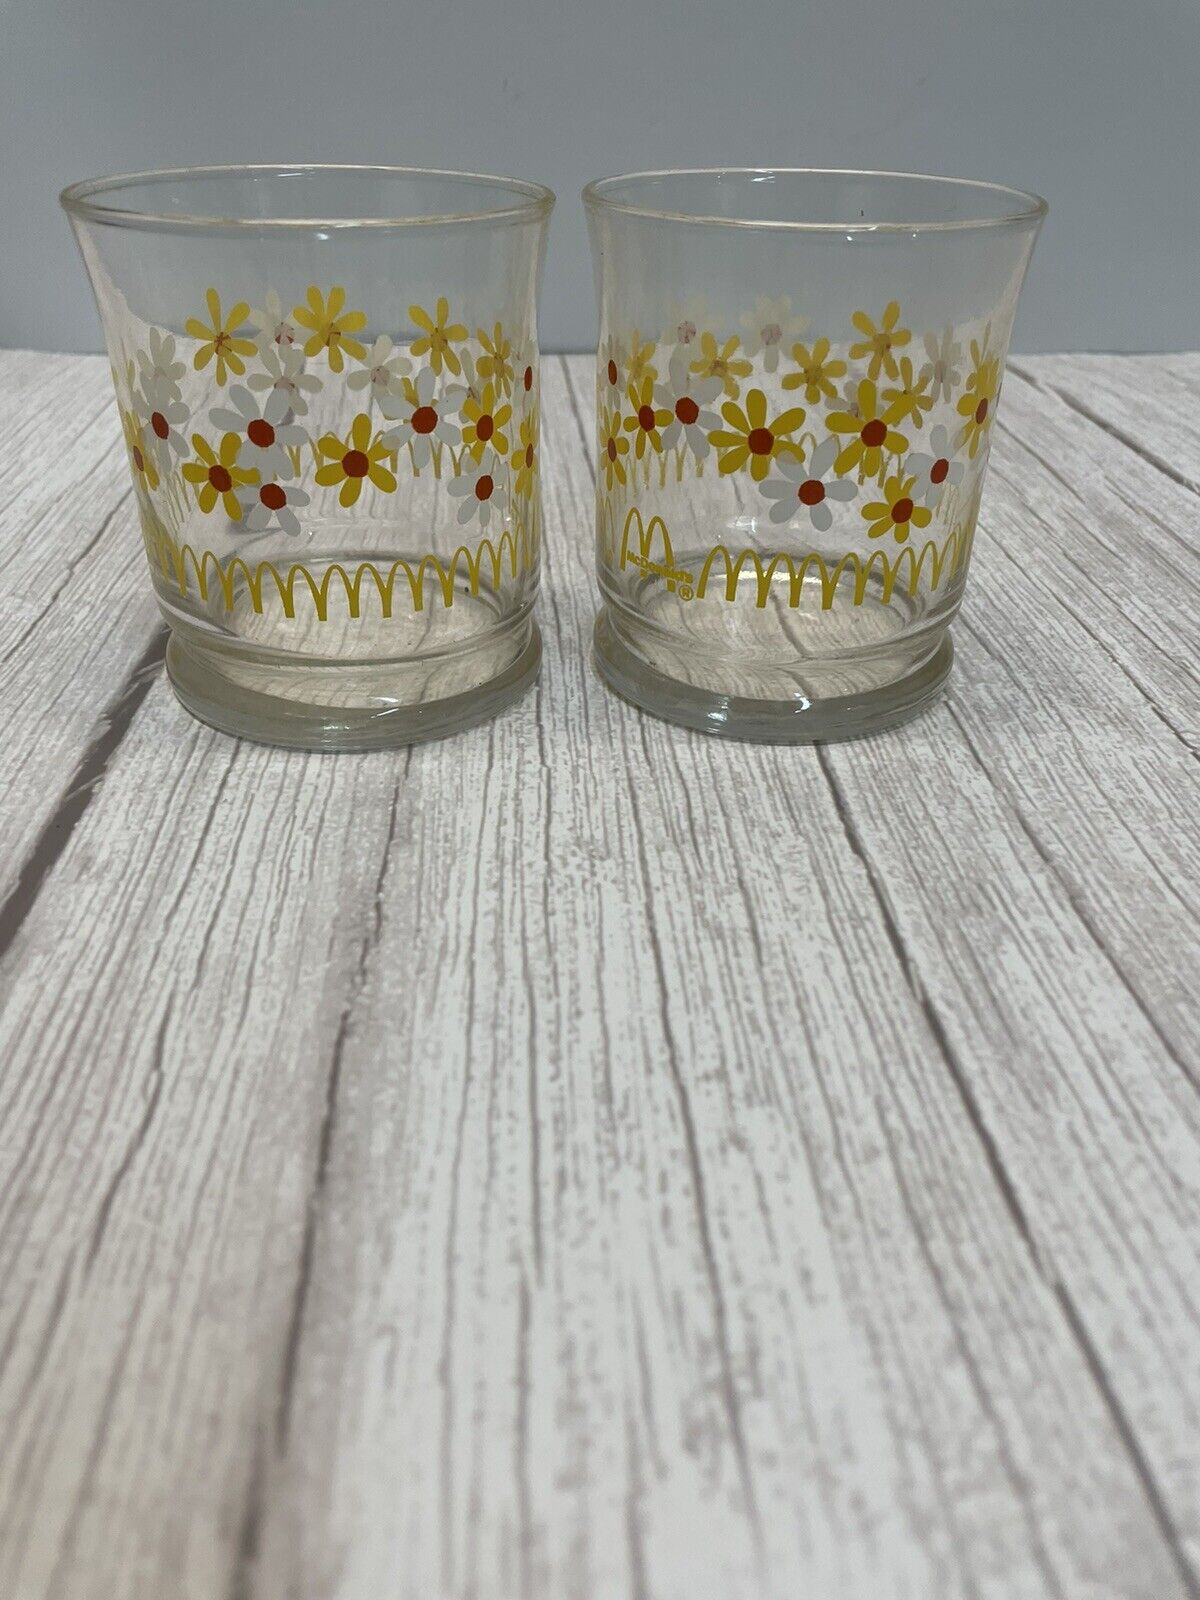 Vintage Libbey McDonald\'s Yellow White Daisy Flower Drinking Glasses (2)